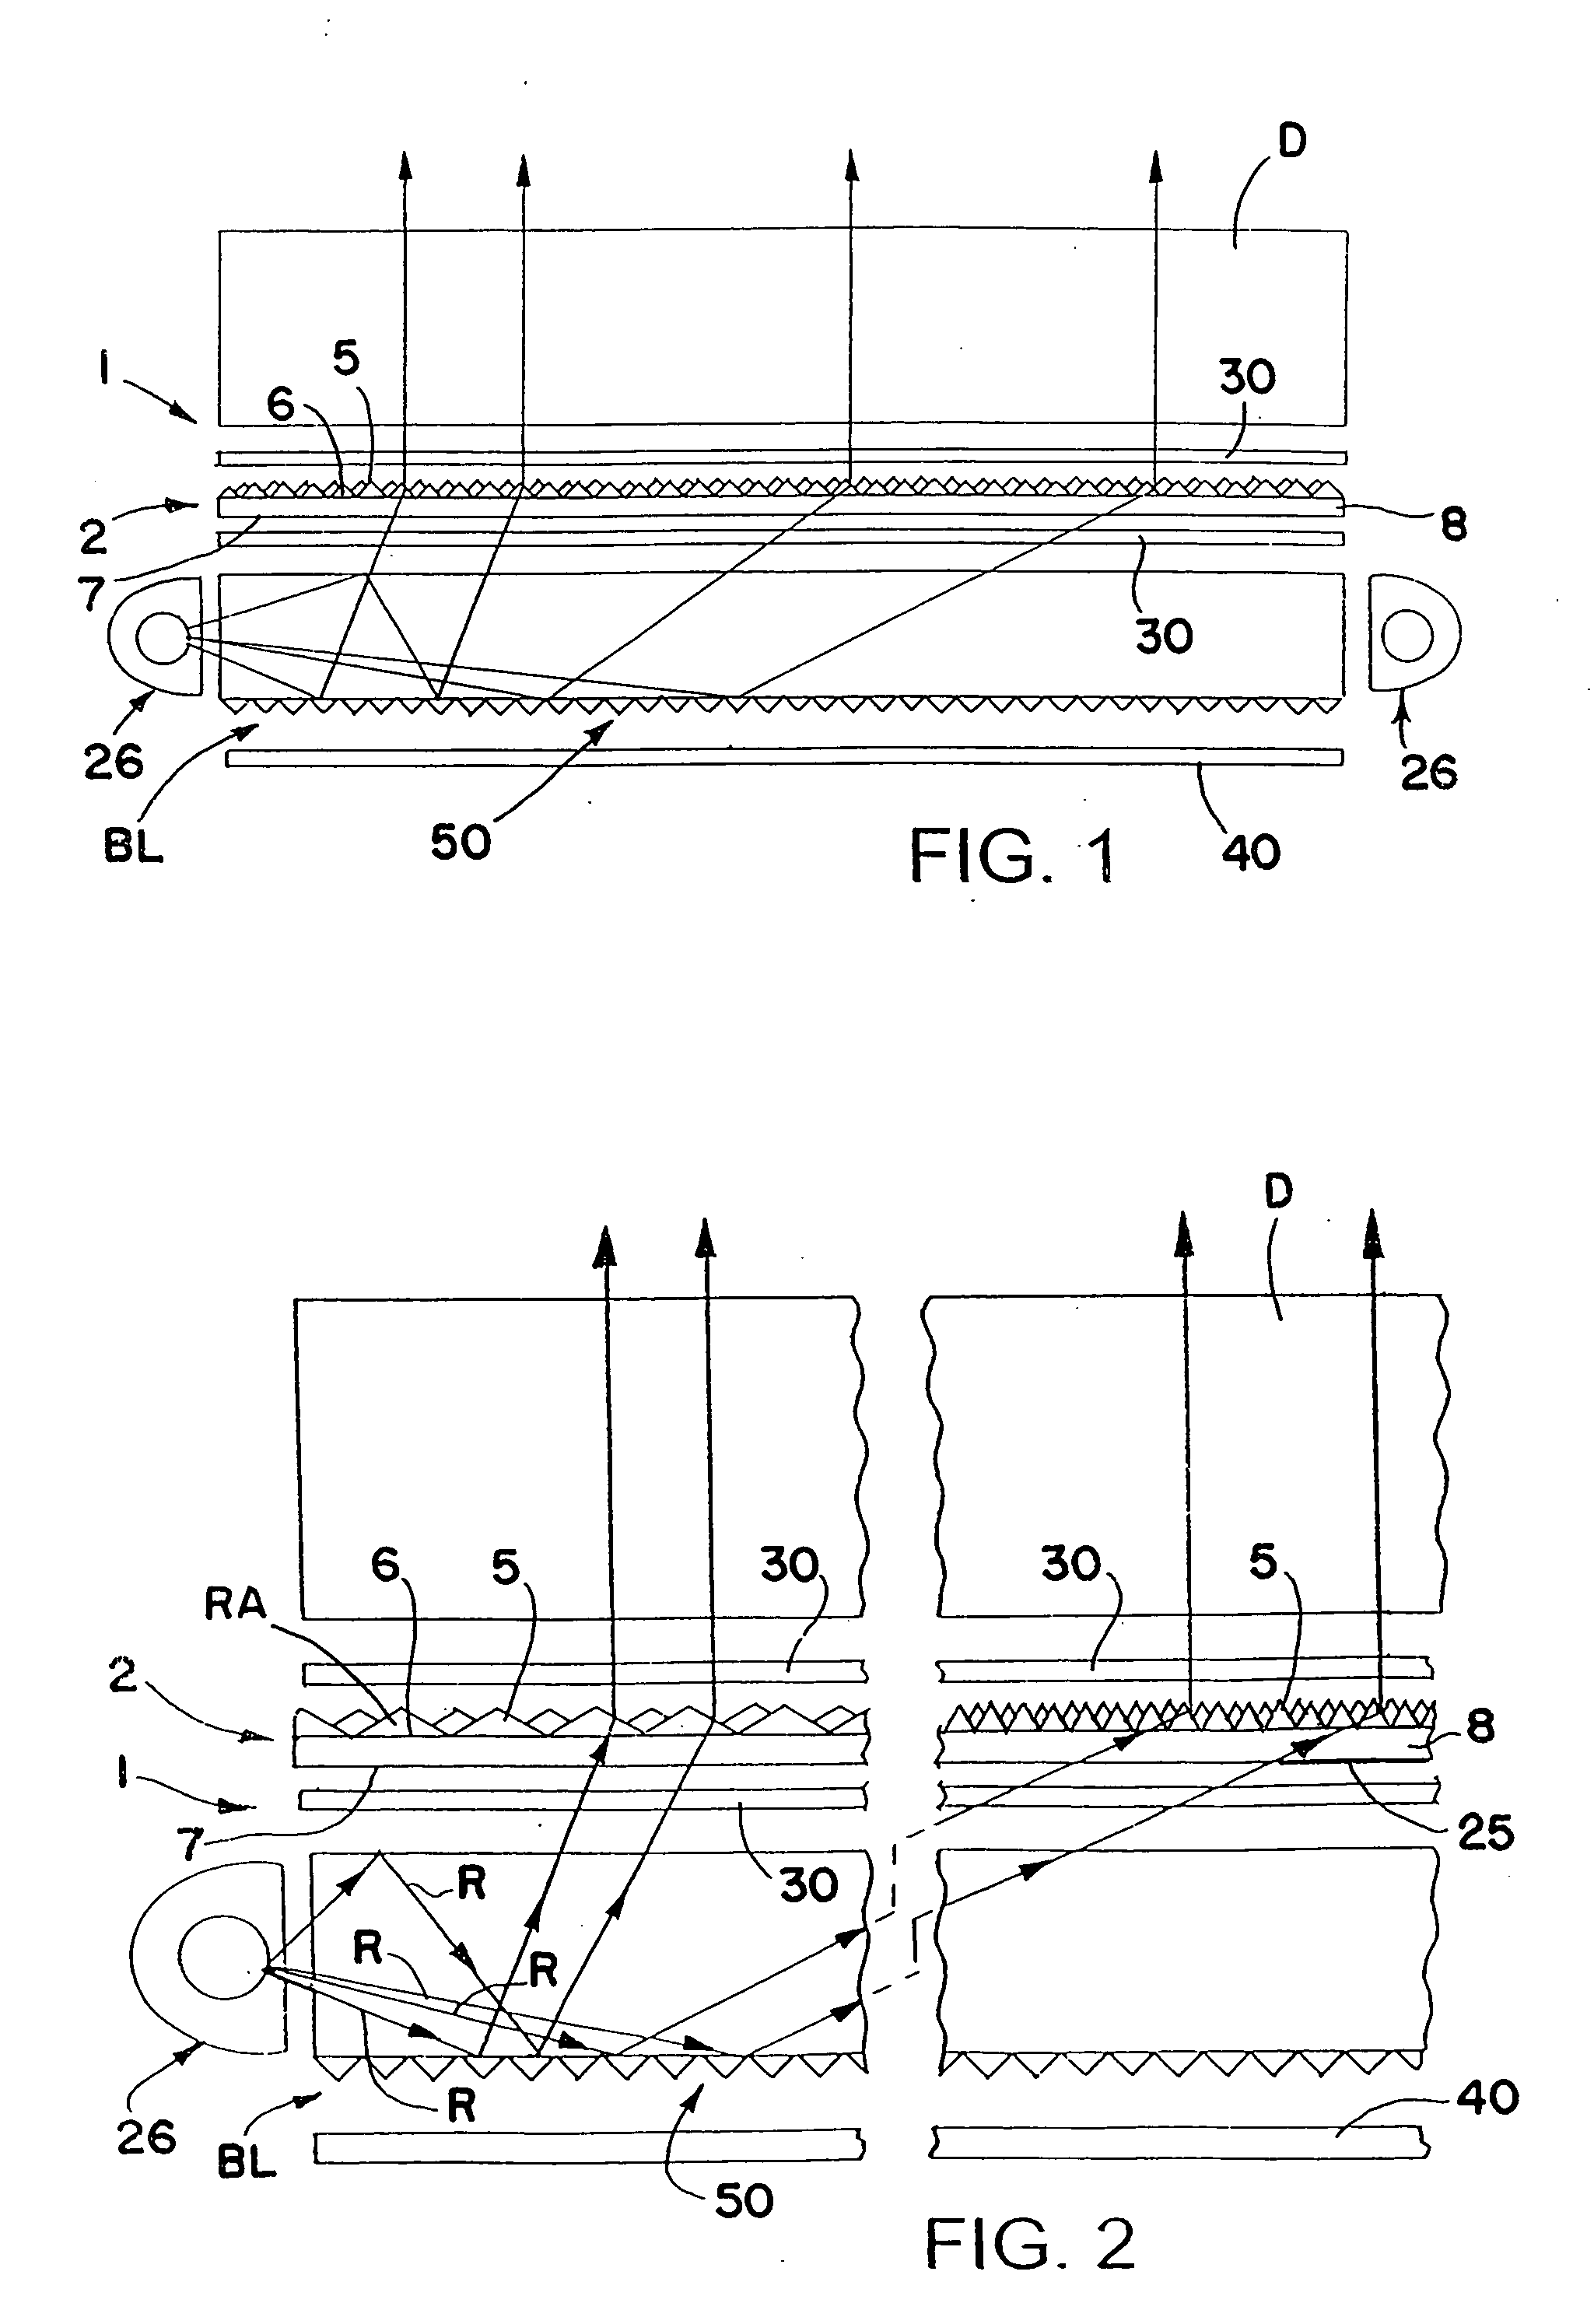 Methods of cutting or forming cavities in a substrate for use in making optical films, components or wave guides